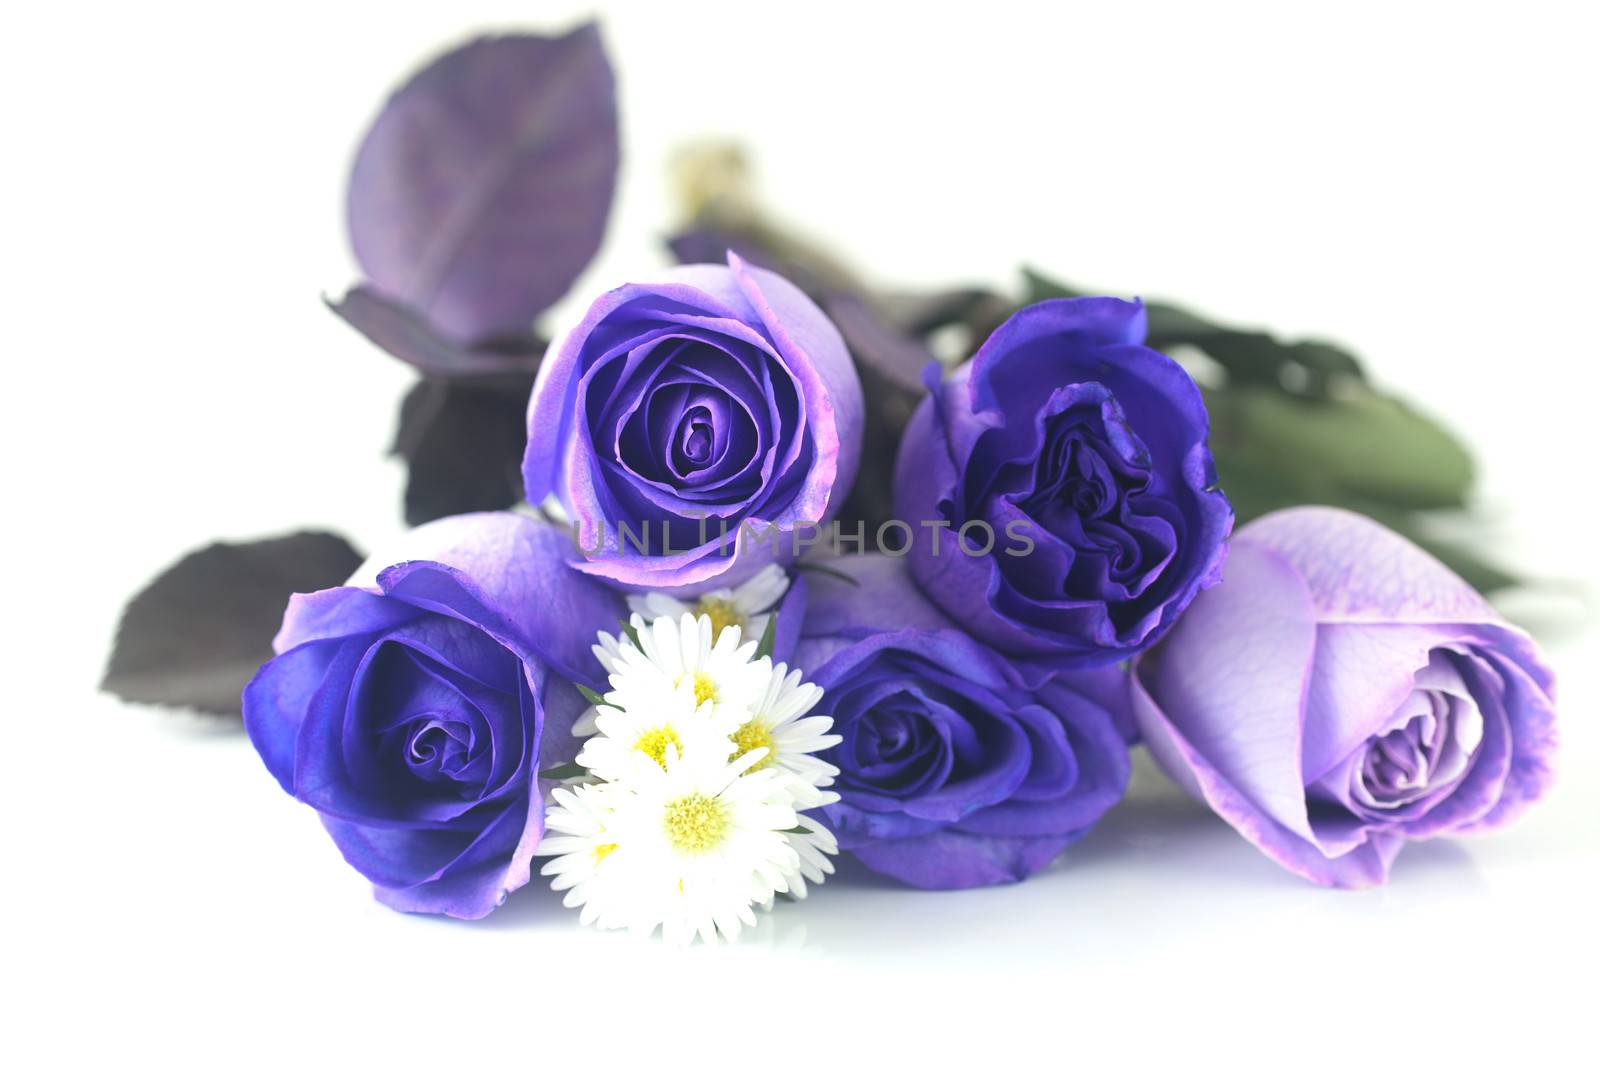 bouquet of beautiful violet roses  by jannyjus